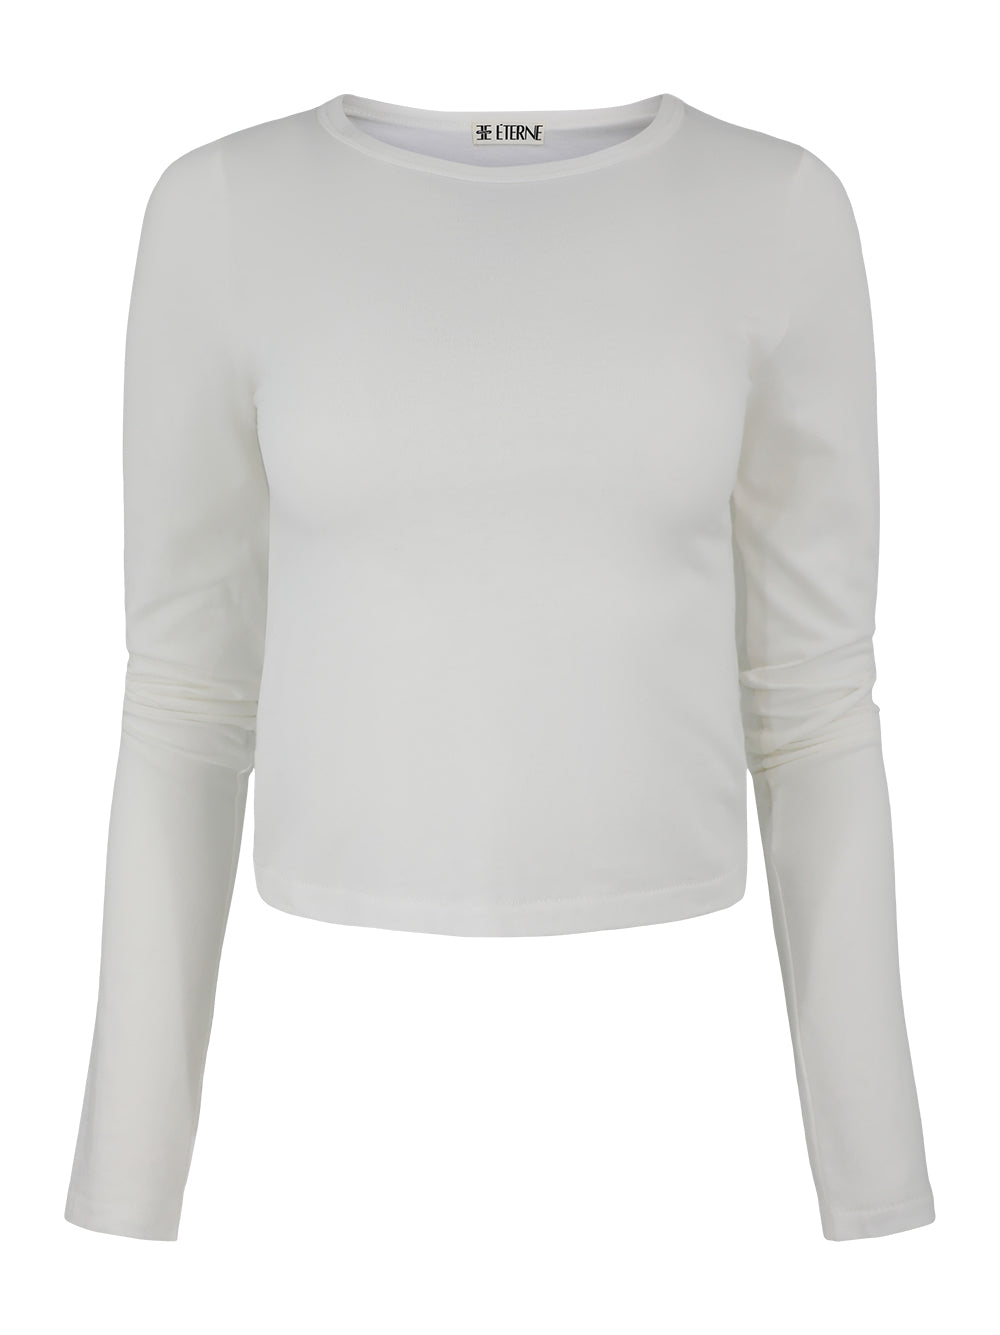 Éterne Long-Sleeve Baby Tee (More Colors)